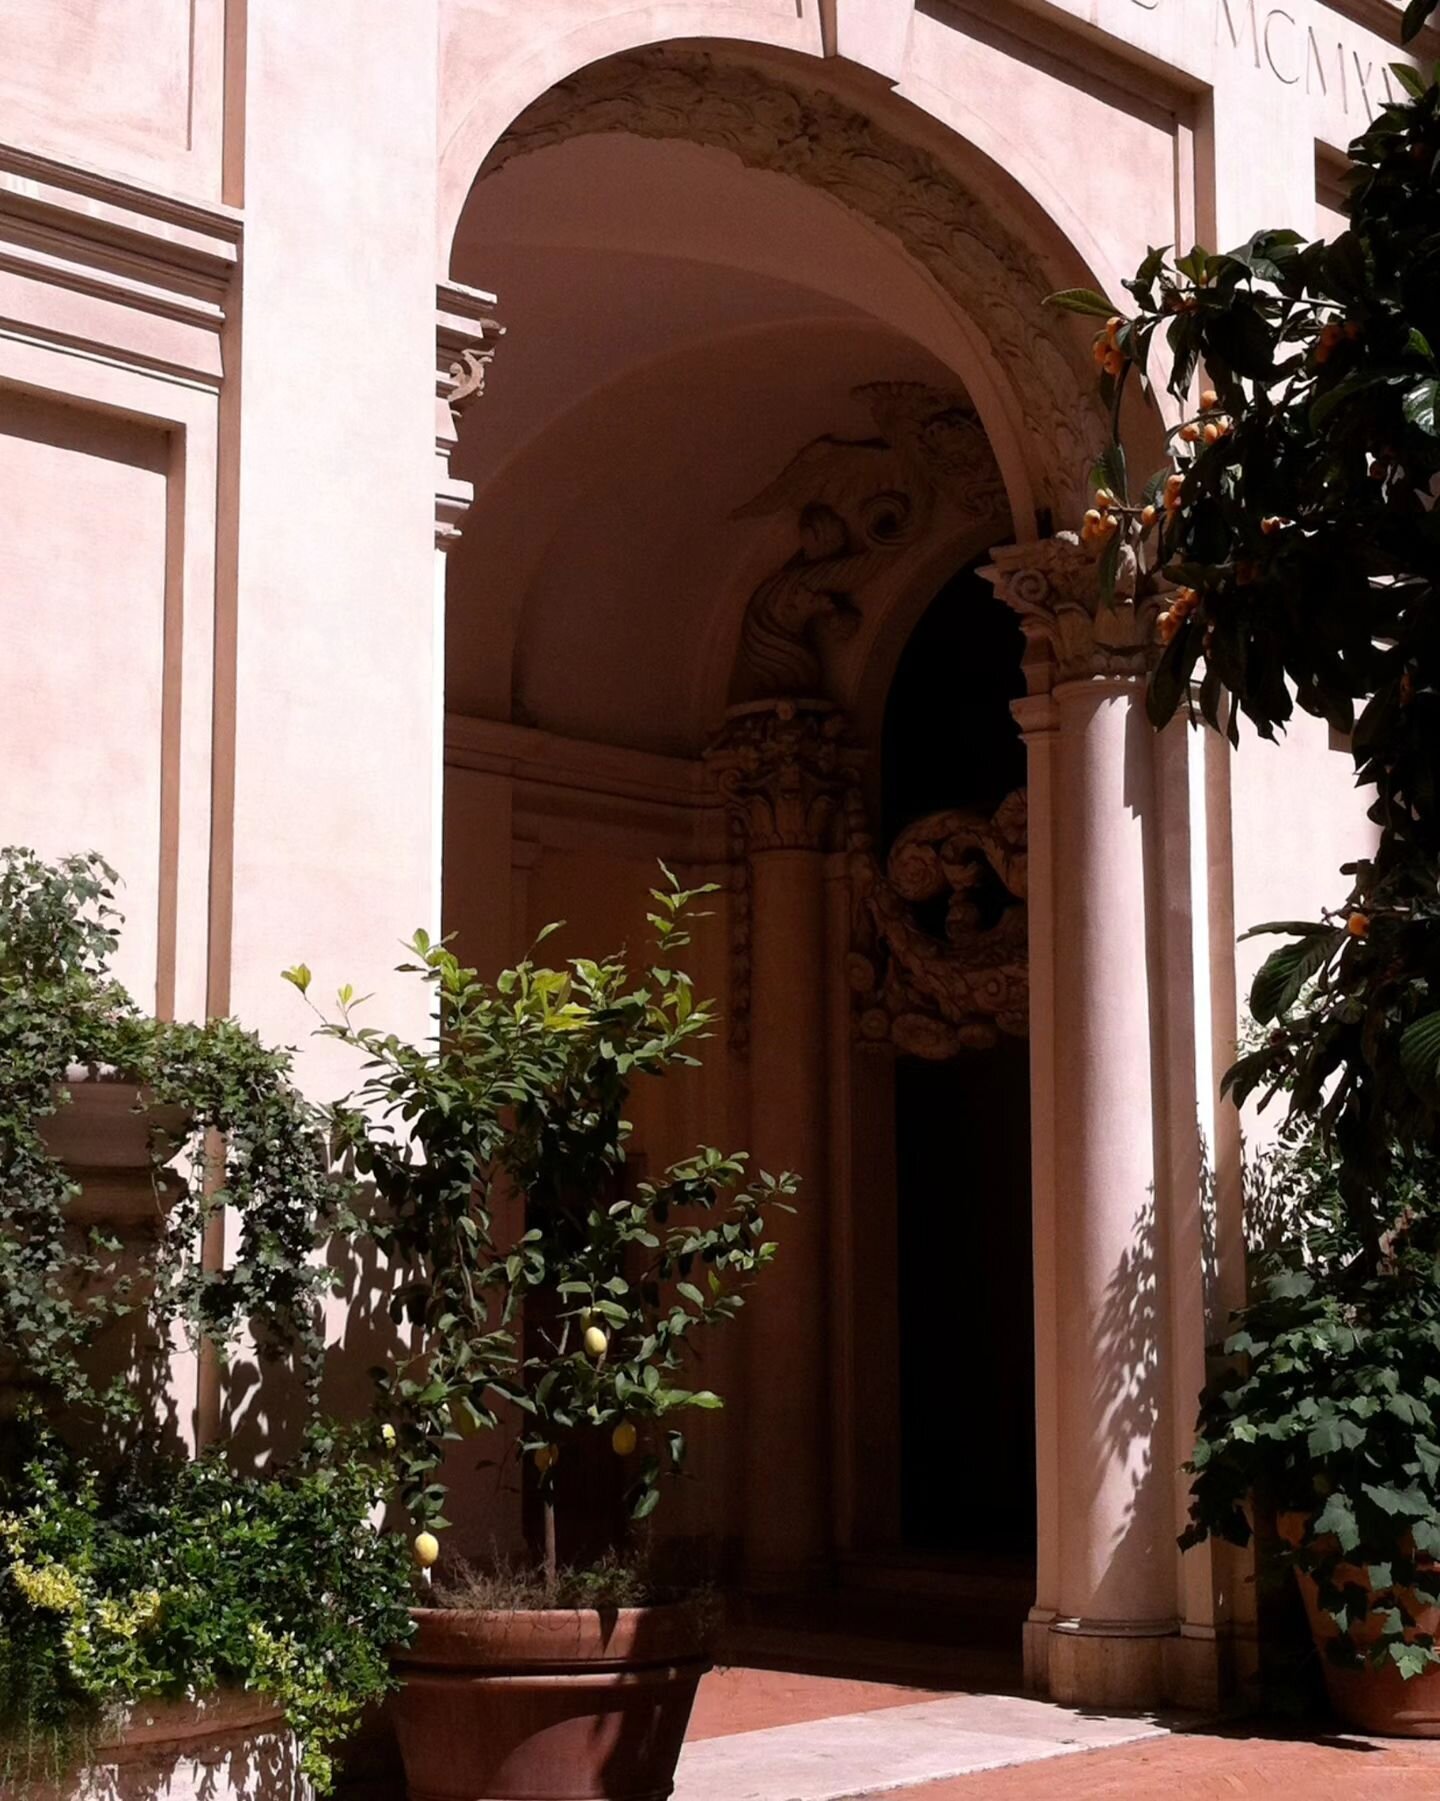 One of the lesser known courtyards of Rome just down the street from the Trevi Fountain-the side loggia of the home of the Accademia di S. Luca in Rome. Imagine entering this every day with Borromini as your professor...